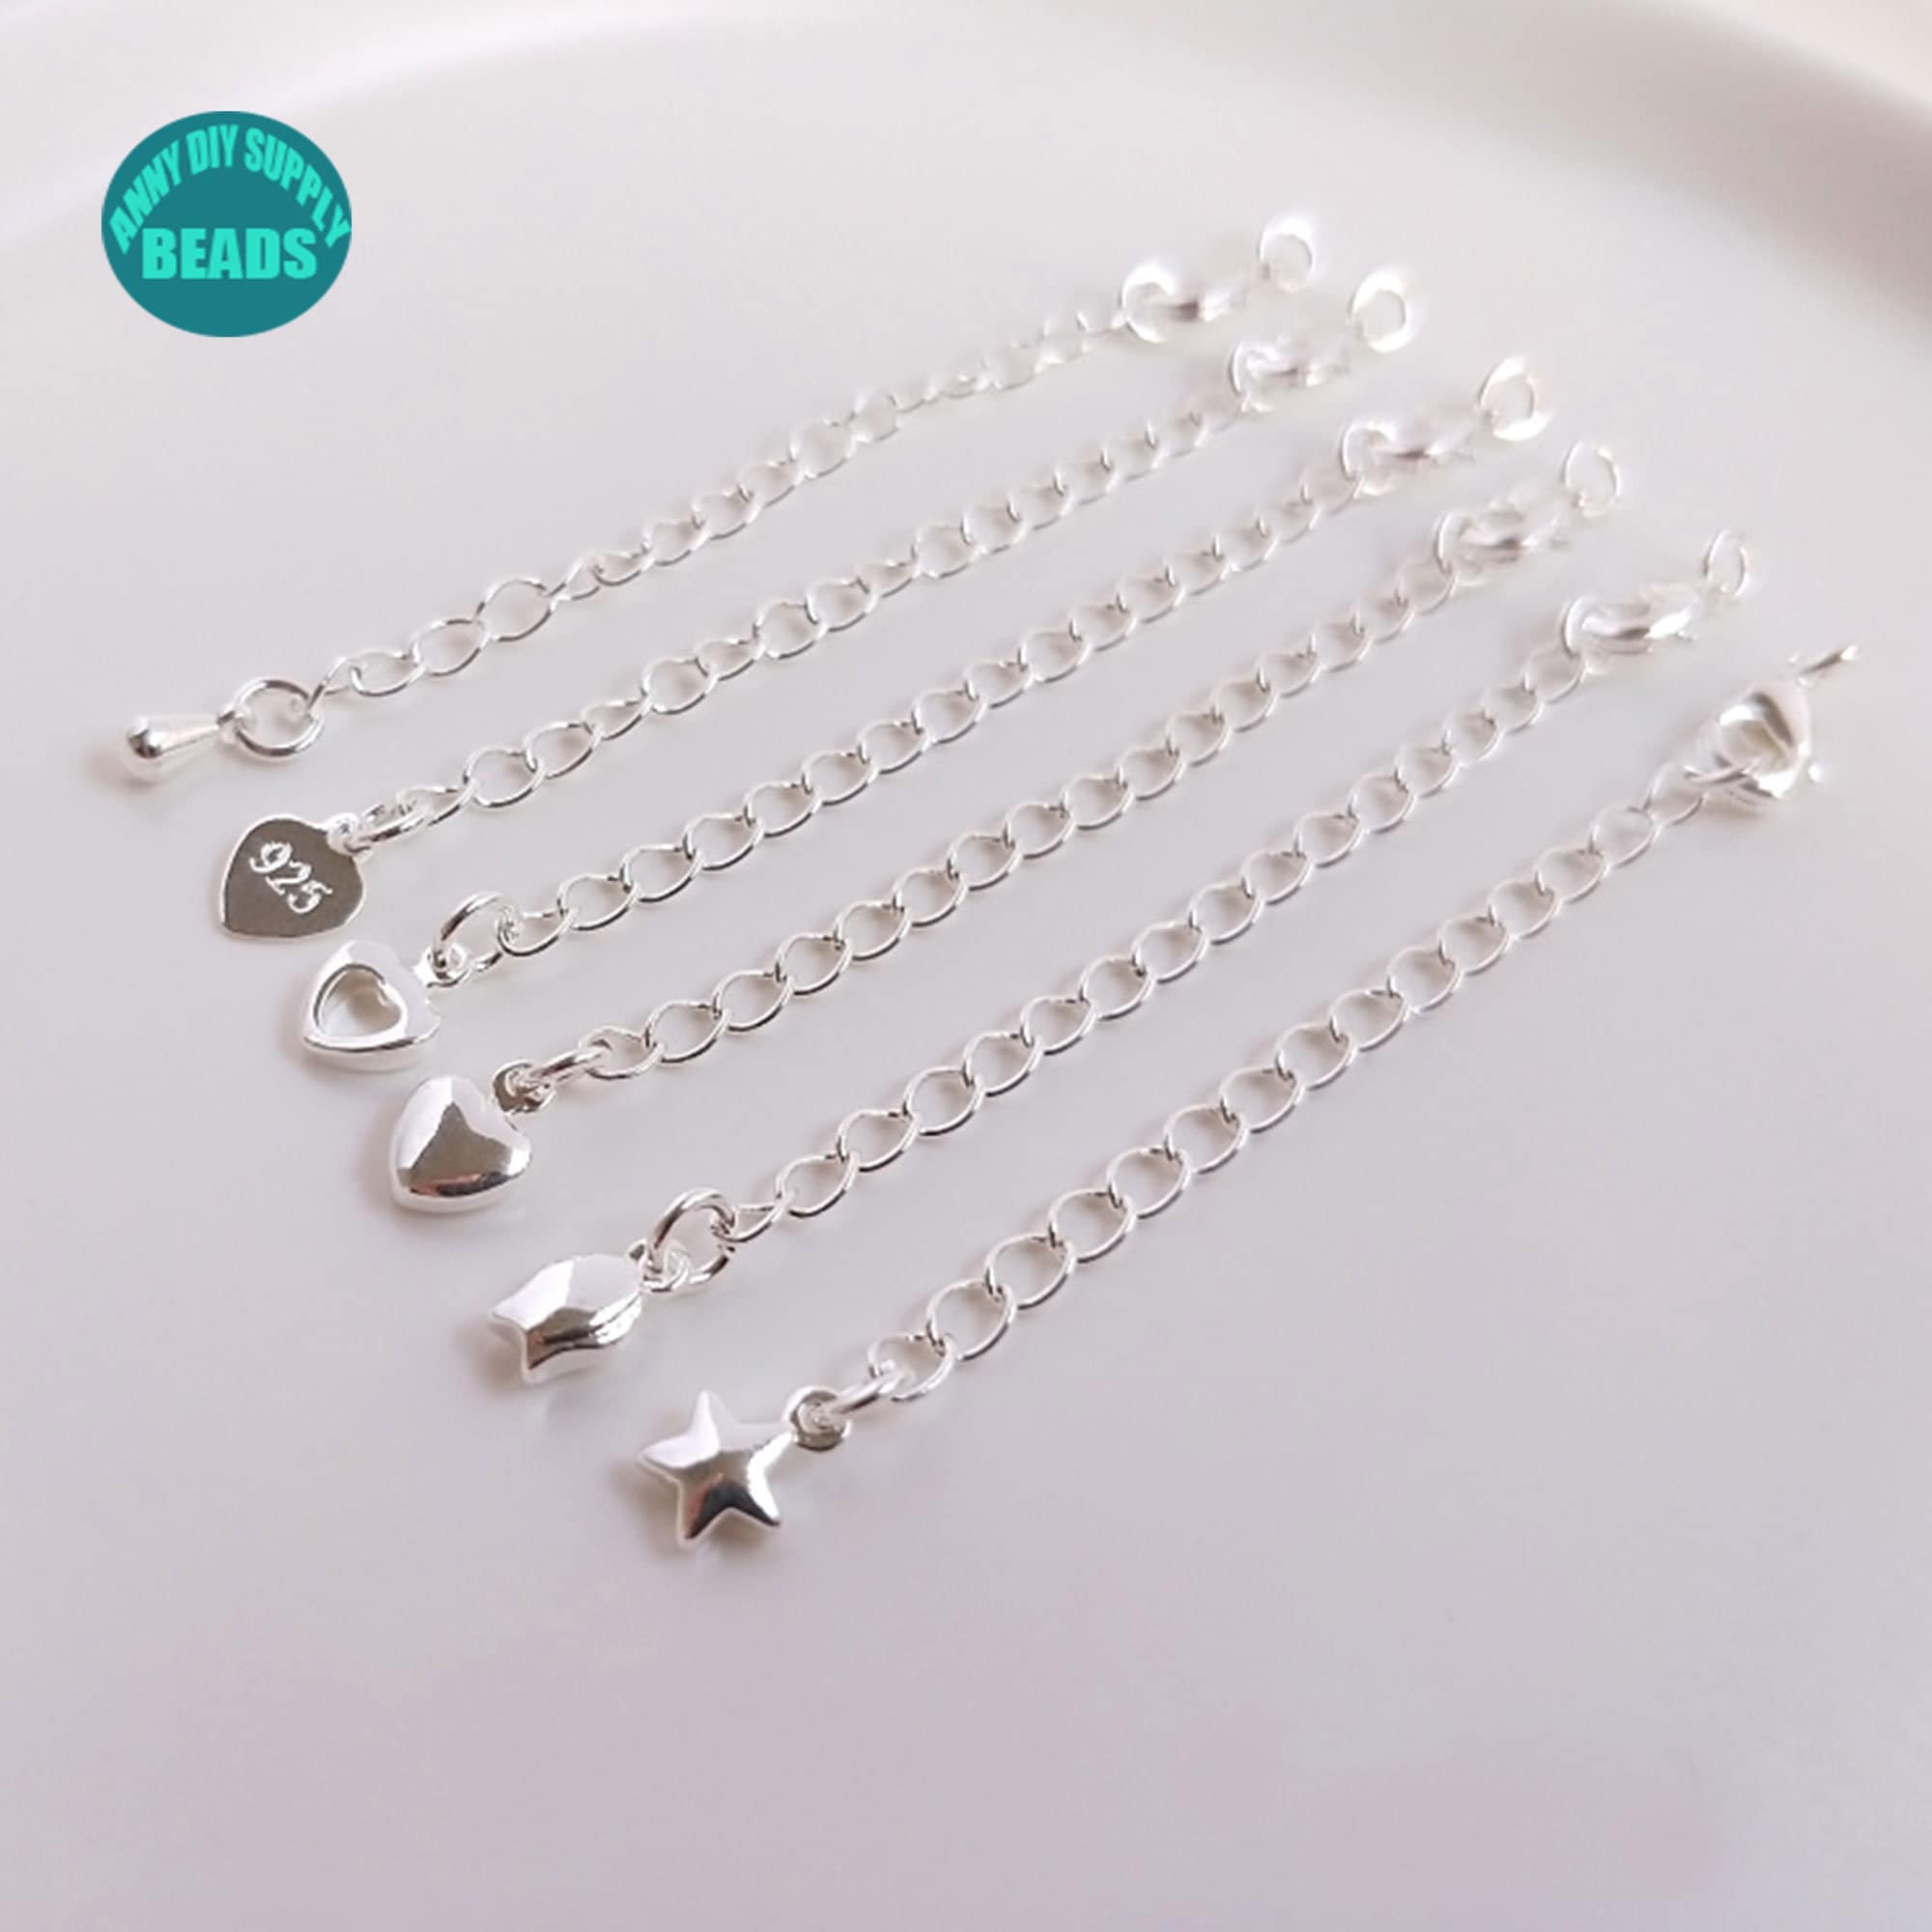 5pcs Stainless Steel Necklace Extension Chain Bulk Bracelet Extended  Lobster Buckle Chains Tail Extender for DIY Jewelry Making